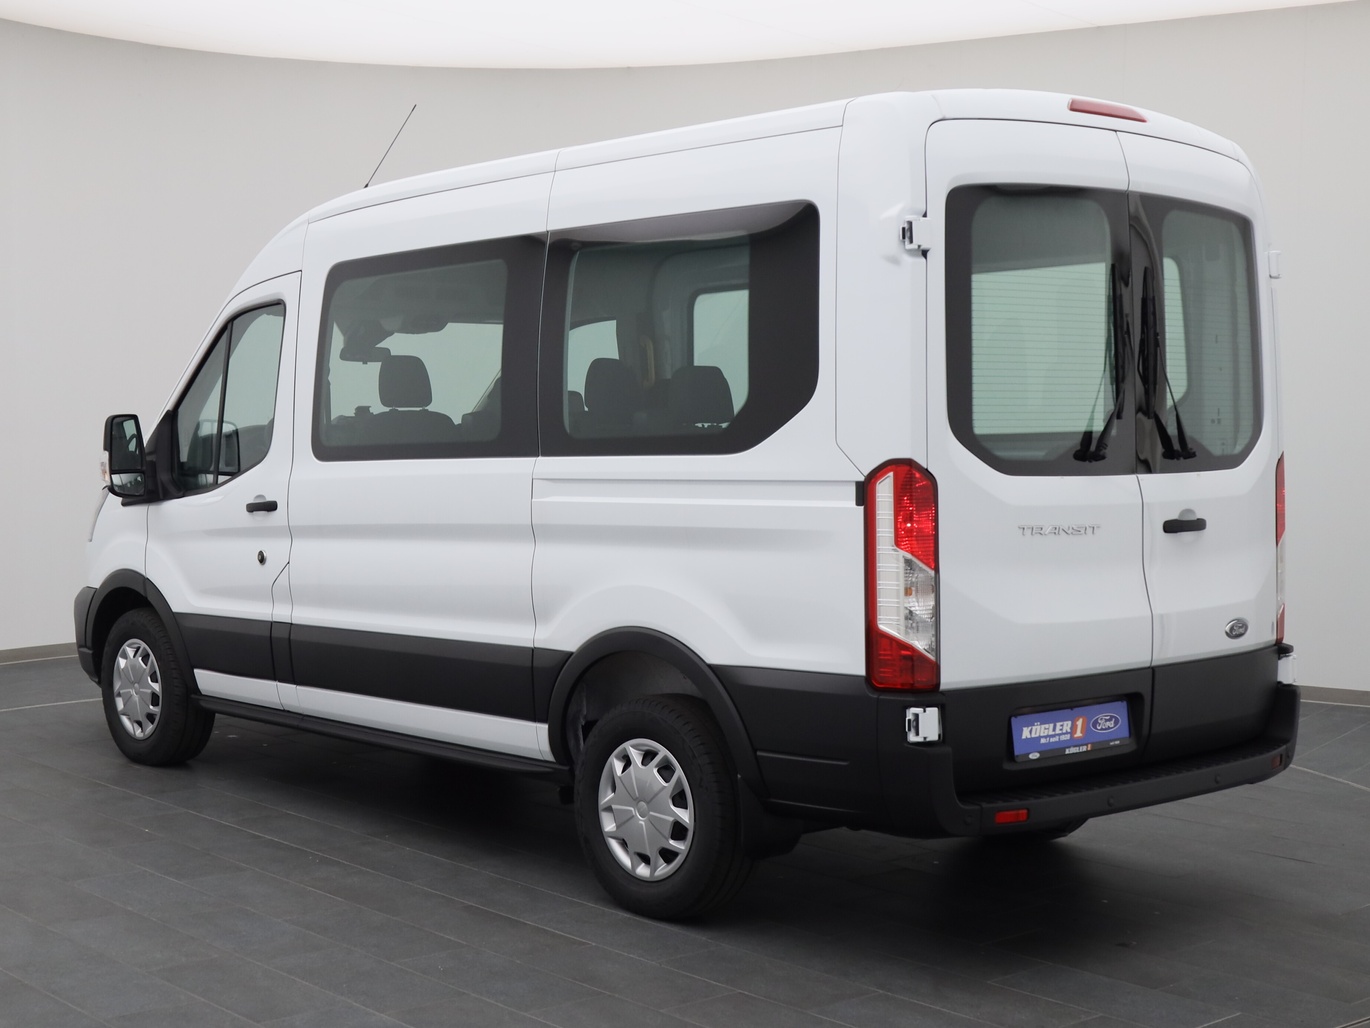  Ford Transit Kombi 350 L2H2 Trend 130PS Aut. in Weiss 